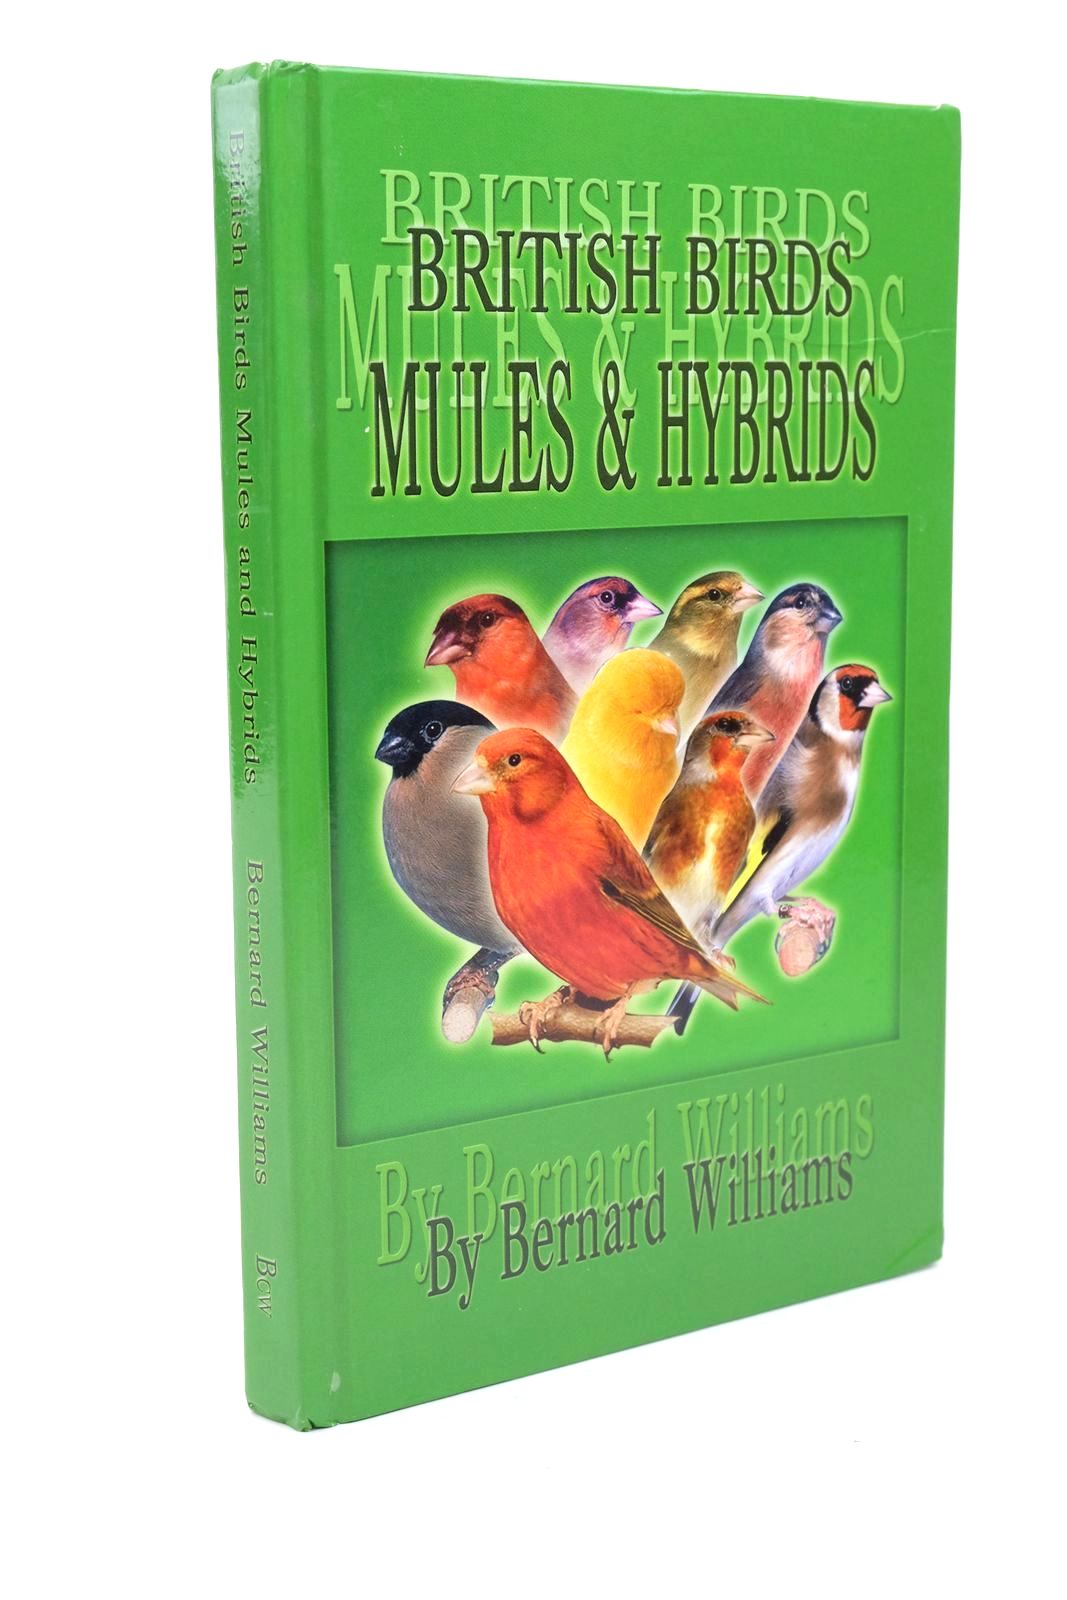 Photo of BRITISH BIRDS MULES AND HYBRIDS written by Williams, Bernard published by B.C. Williams (STOCK CODE: 1323033)  for sale by Stella & Rose's Books